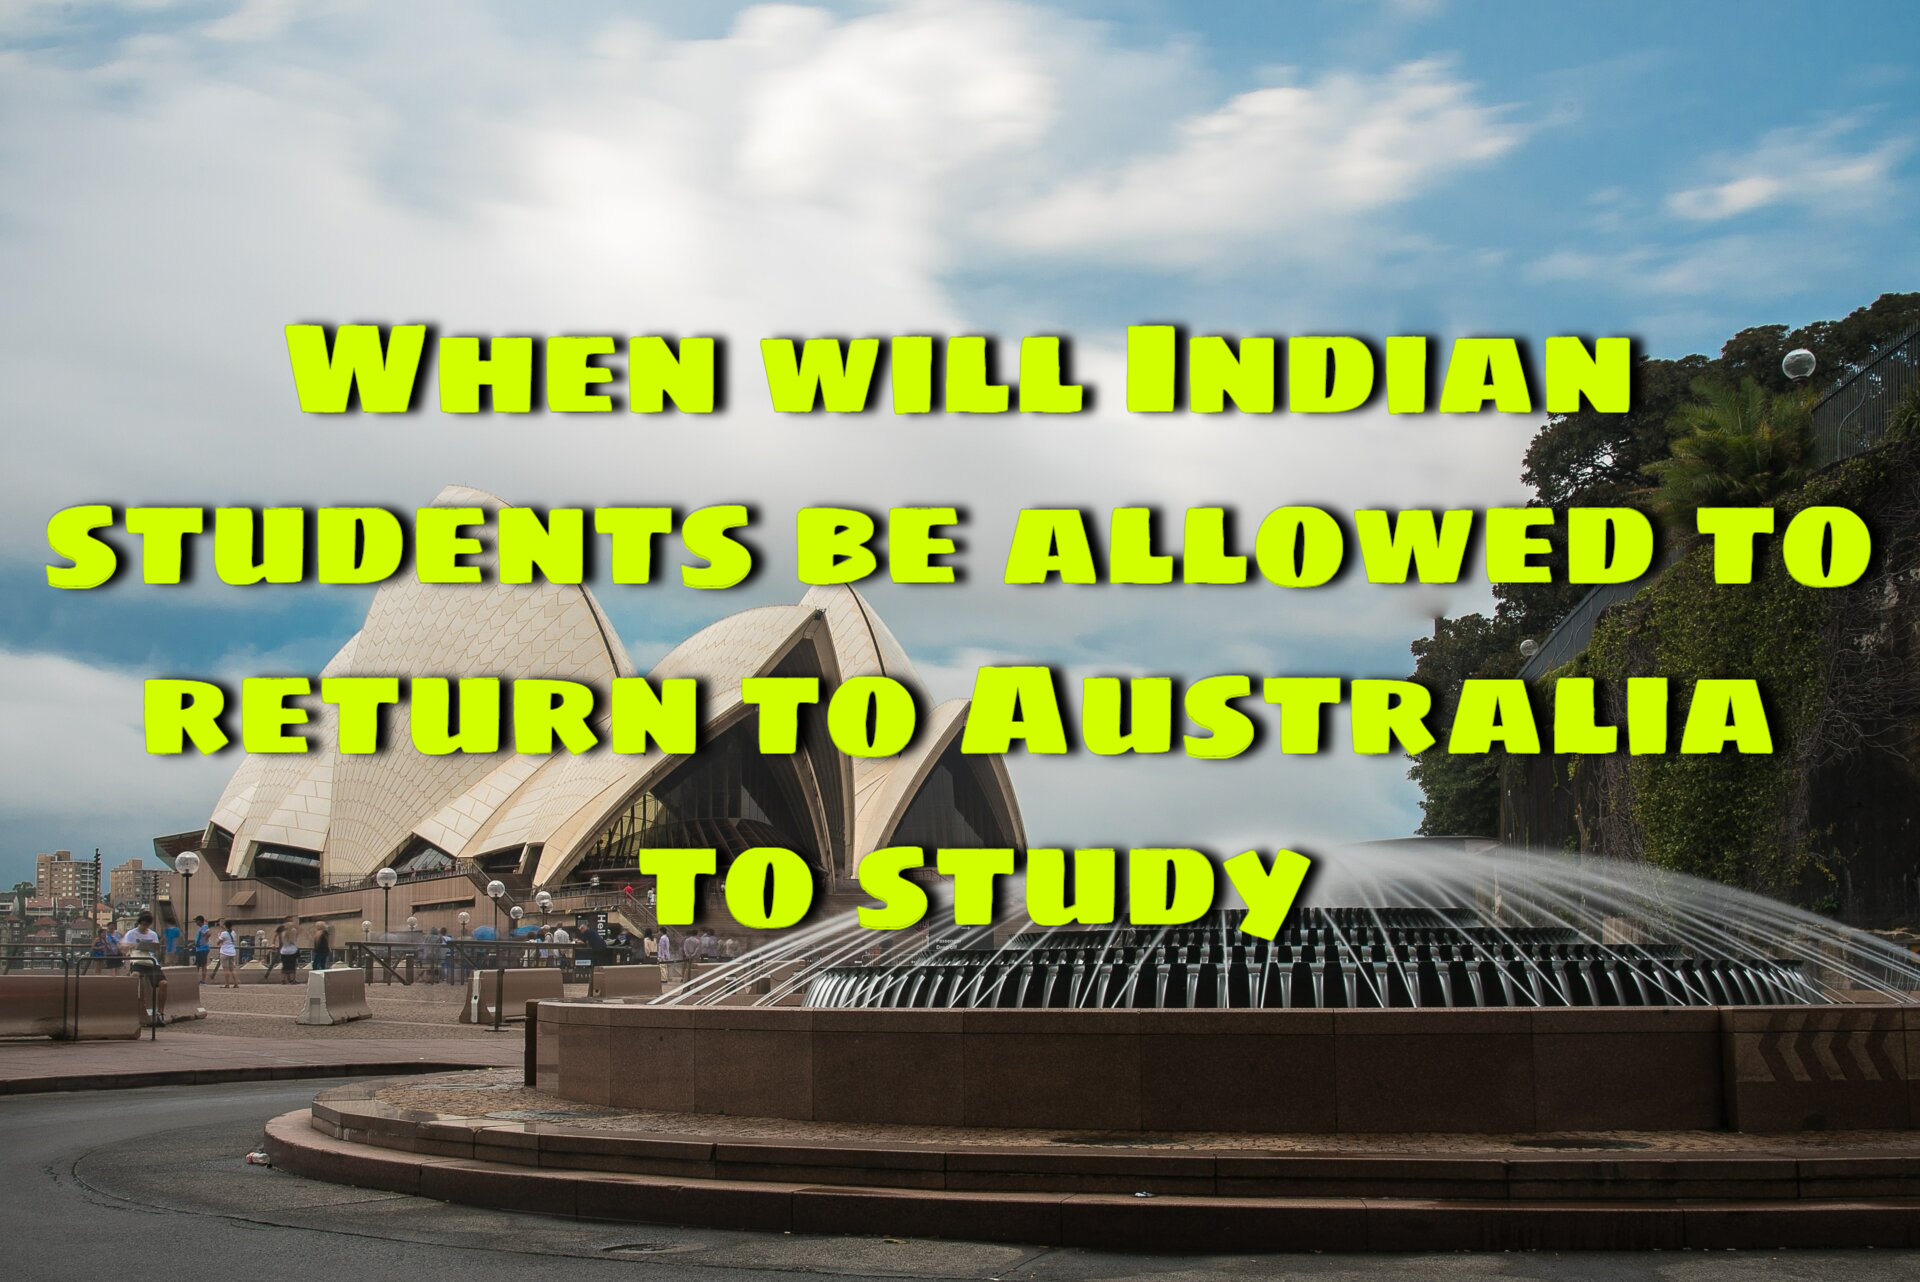 When will Indian students be allowed to return to Australia to study